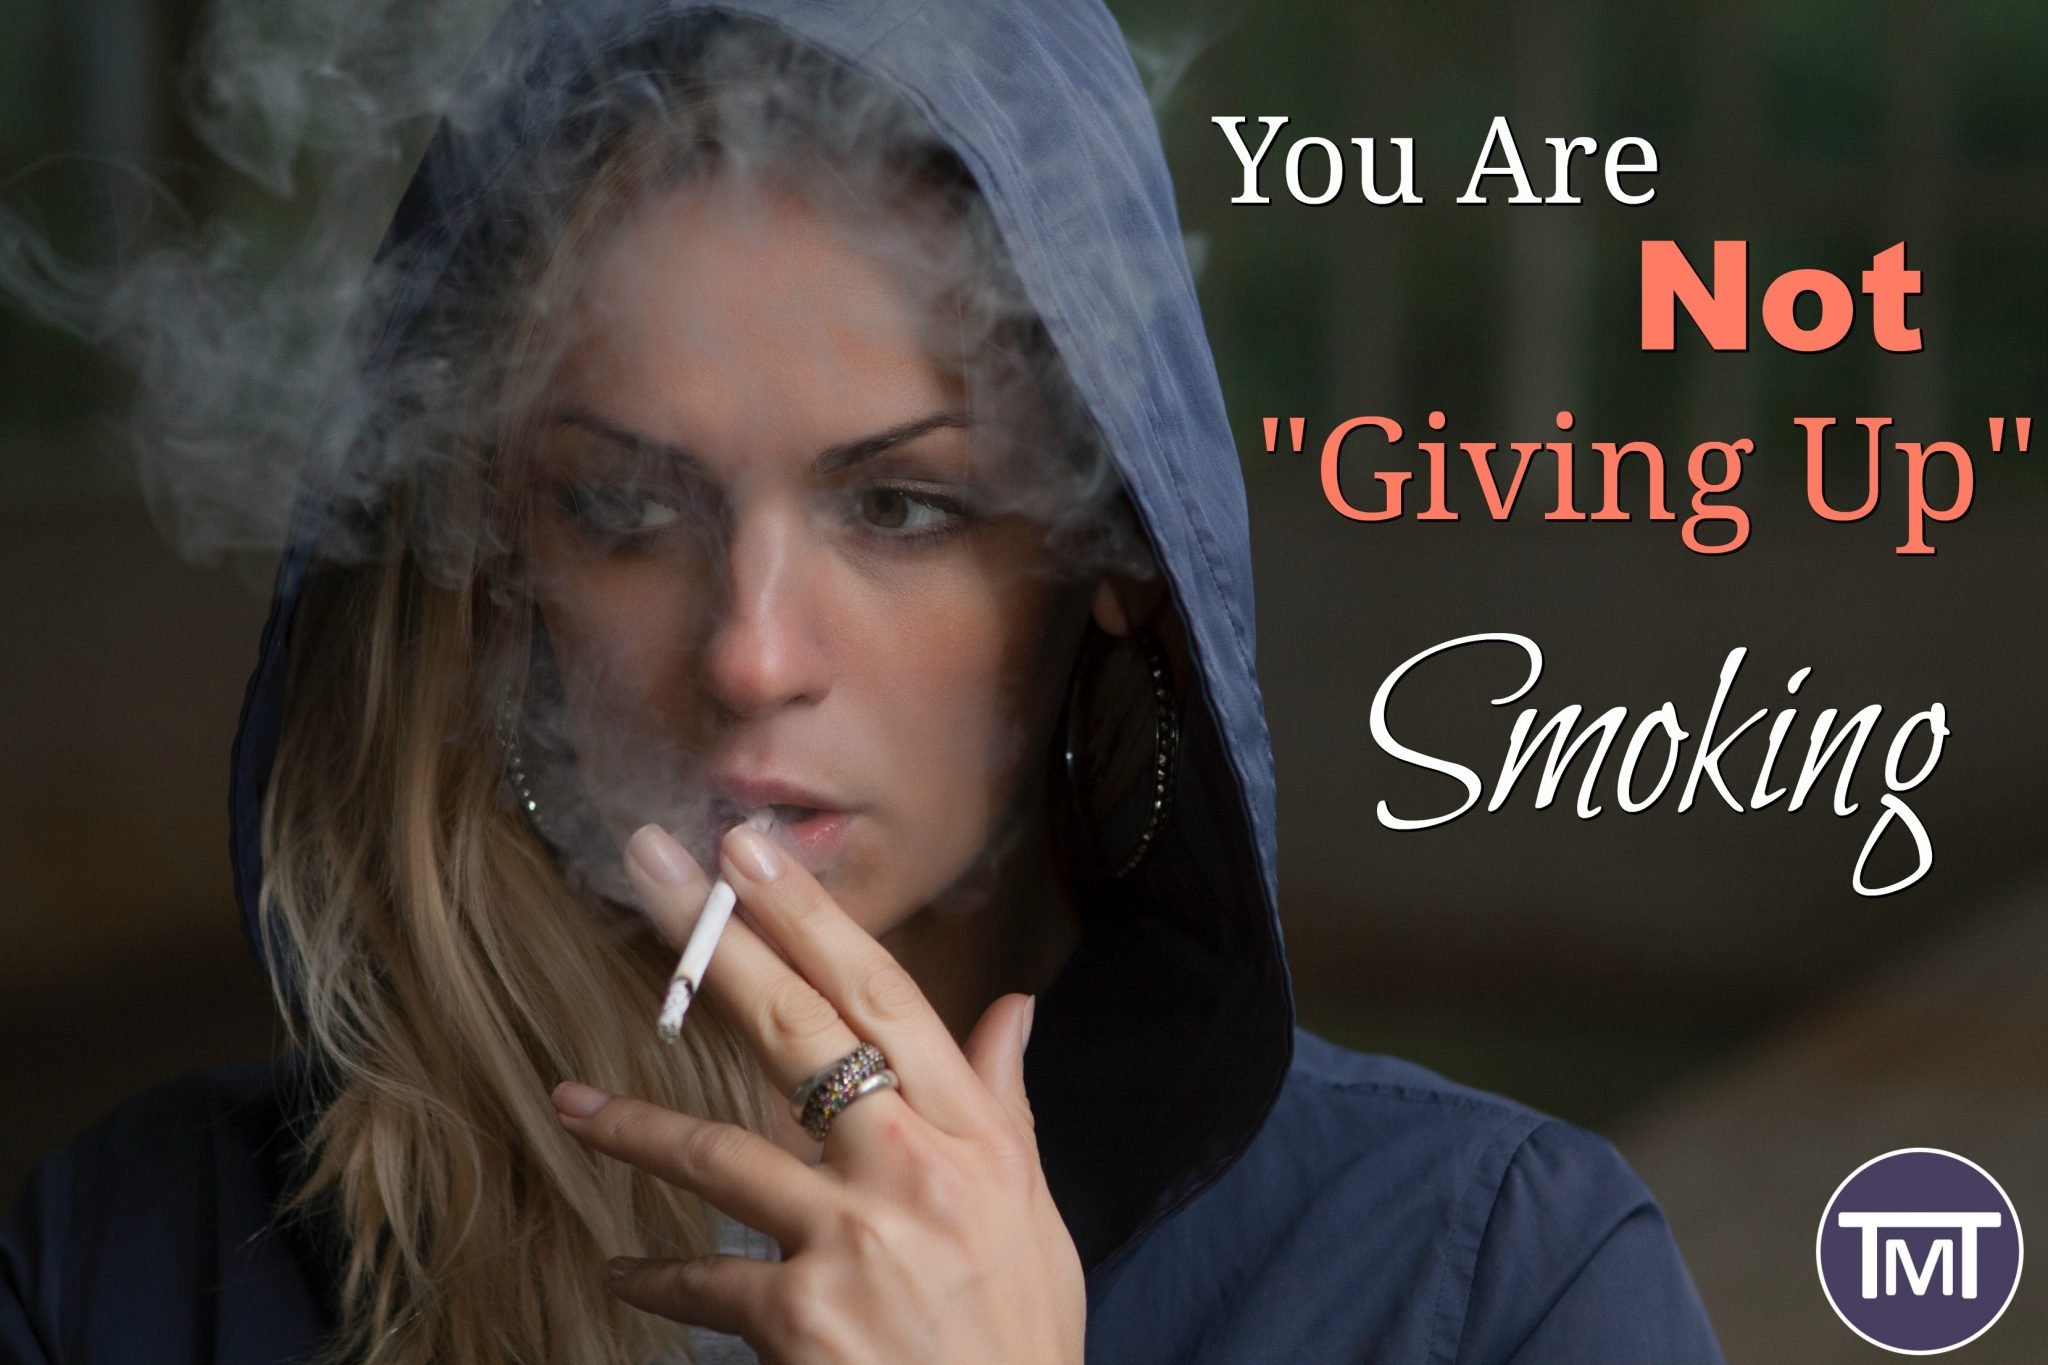 woman in blue hoodie holding cigarrette about to smoke it - You are not giving up smoking feature